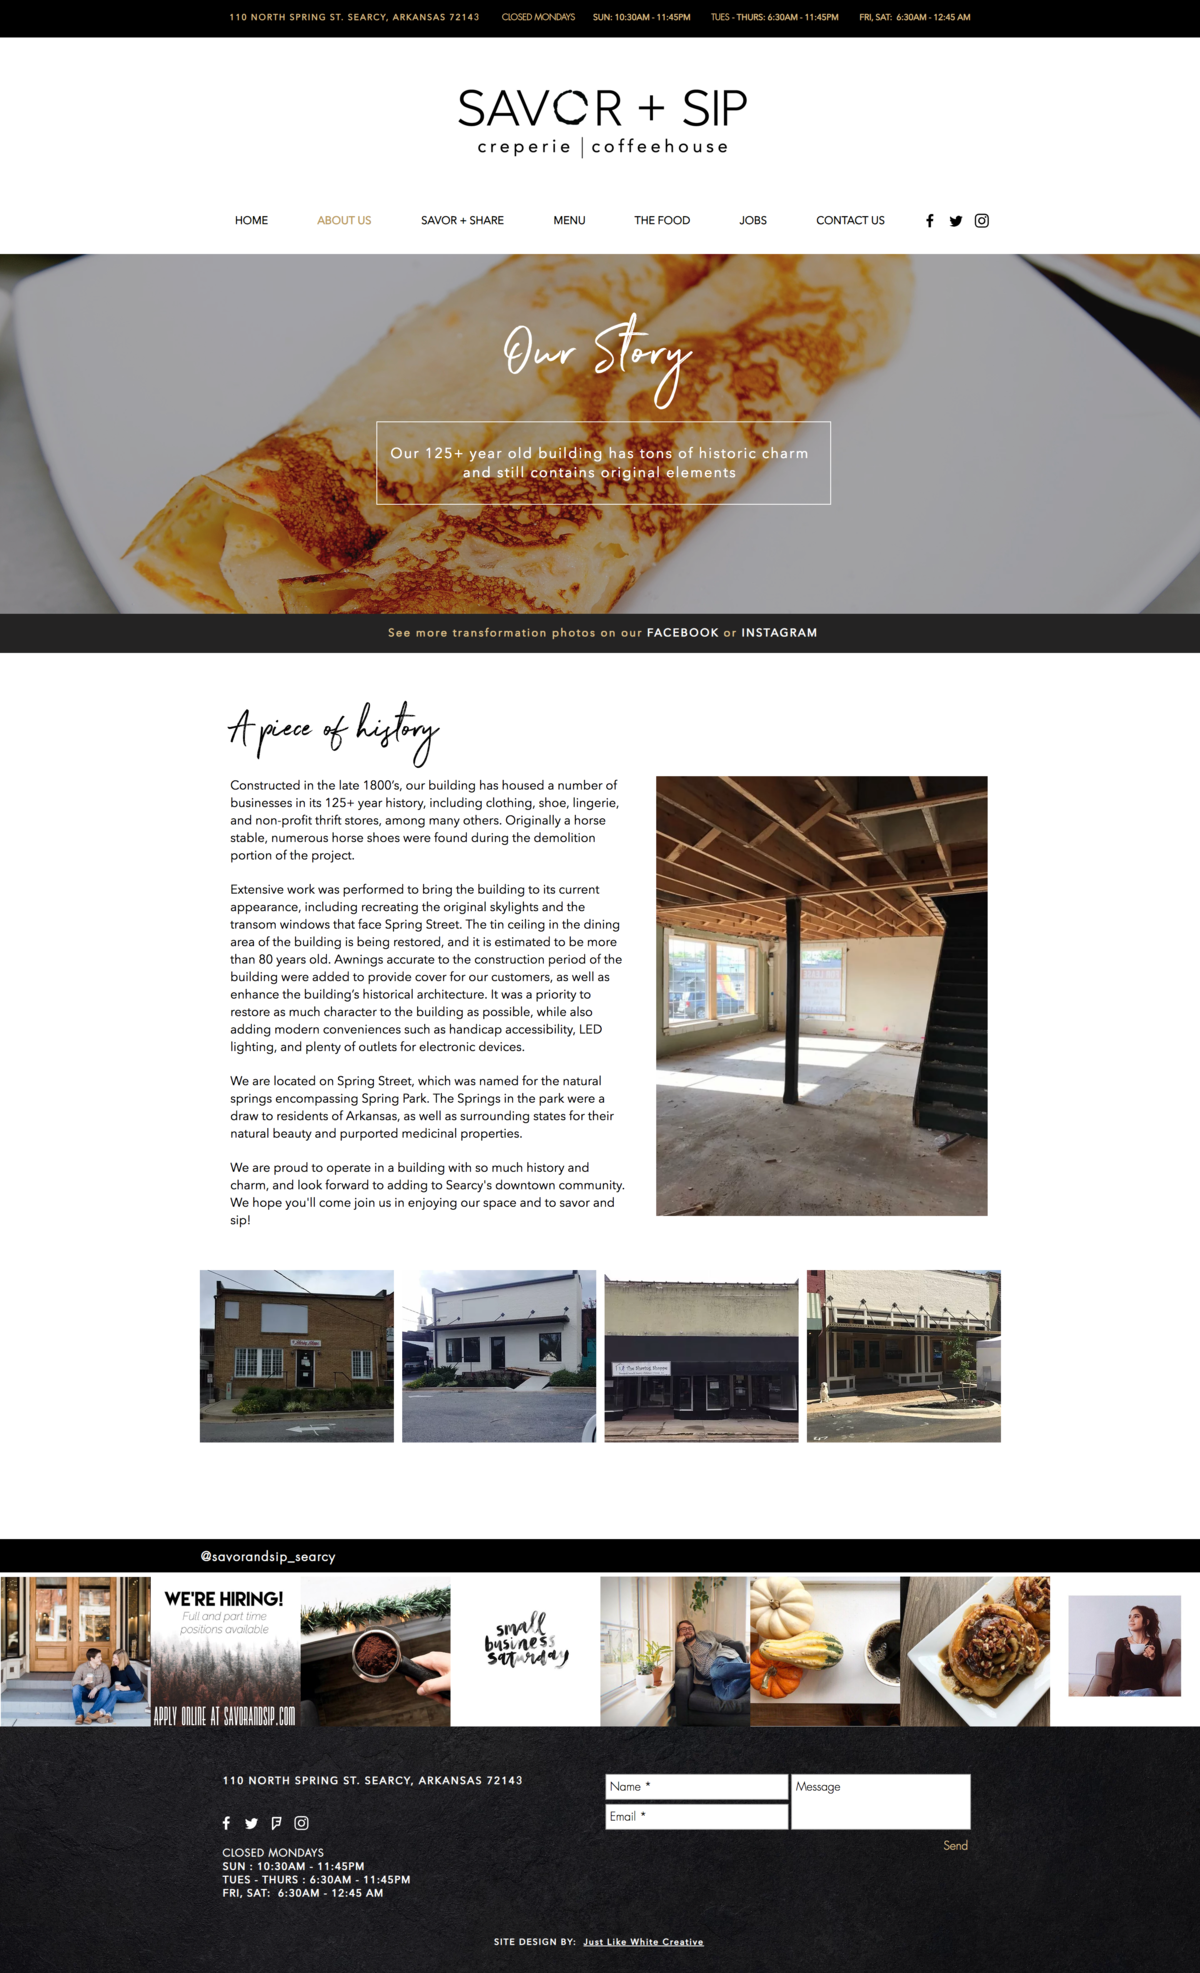 Design of coffee house and cafe website